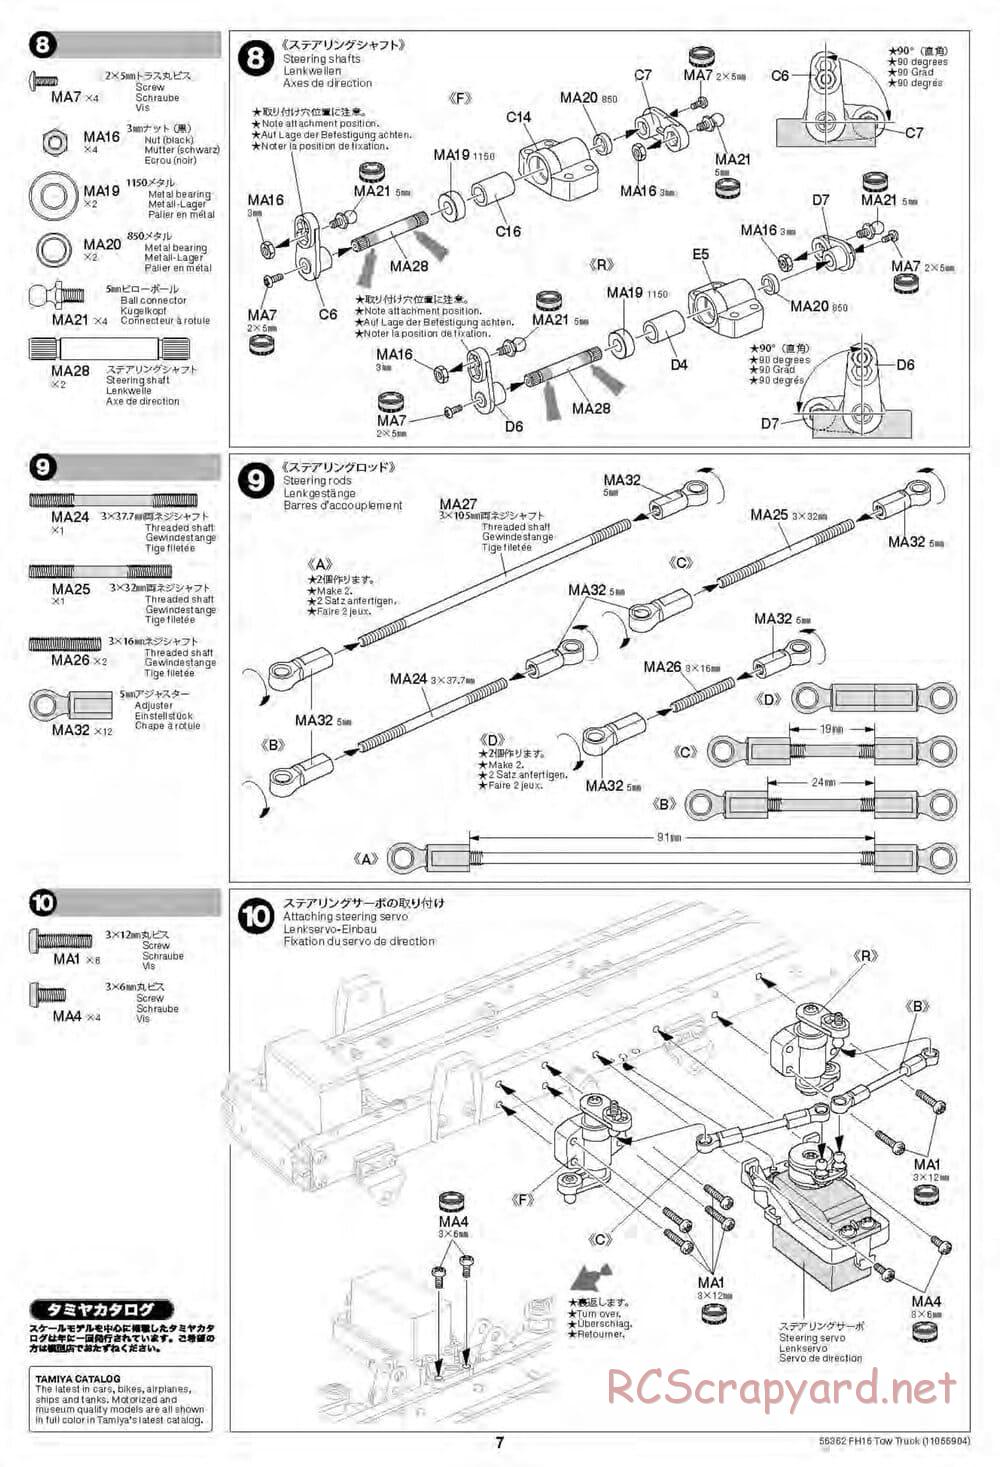 Tamiya - Volvo FH16 Globetrotter 750 8x4 Tow Truck - Manual - Page 7